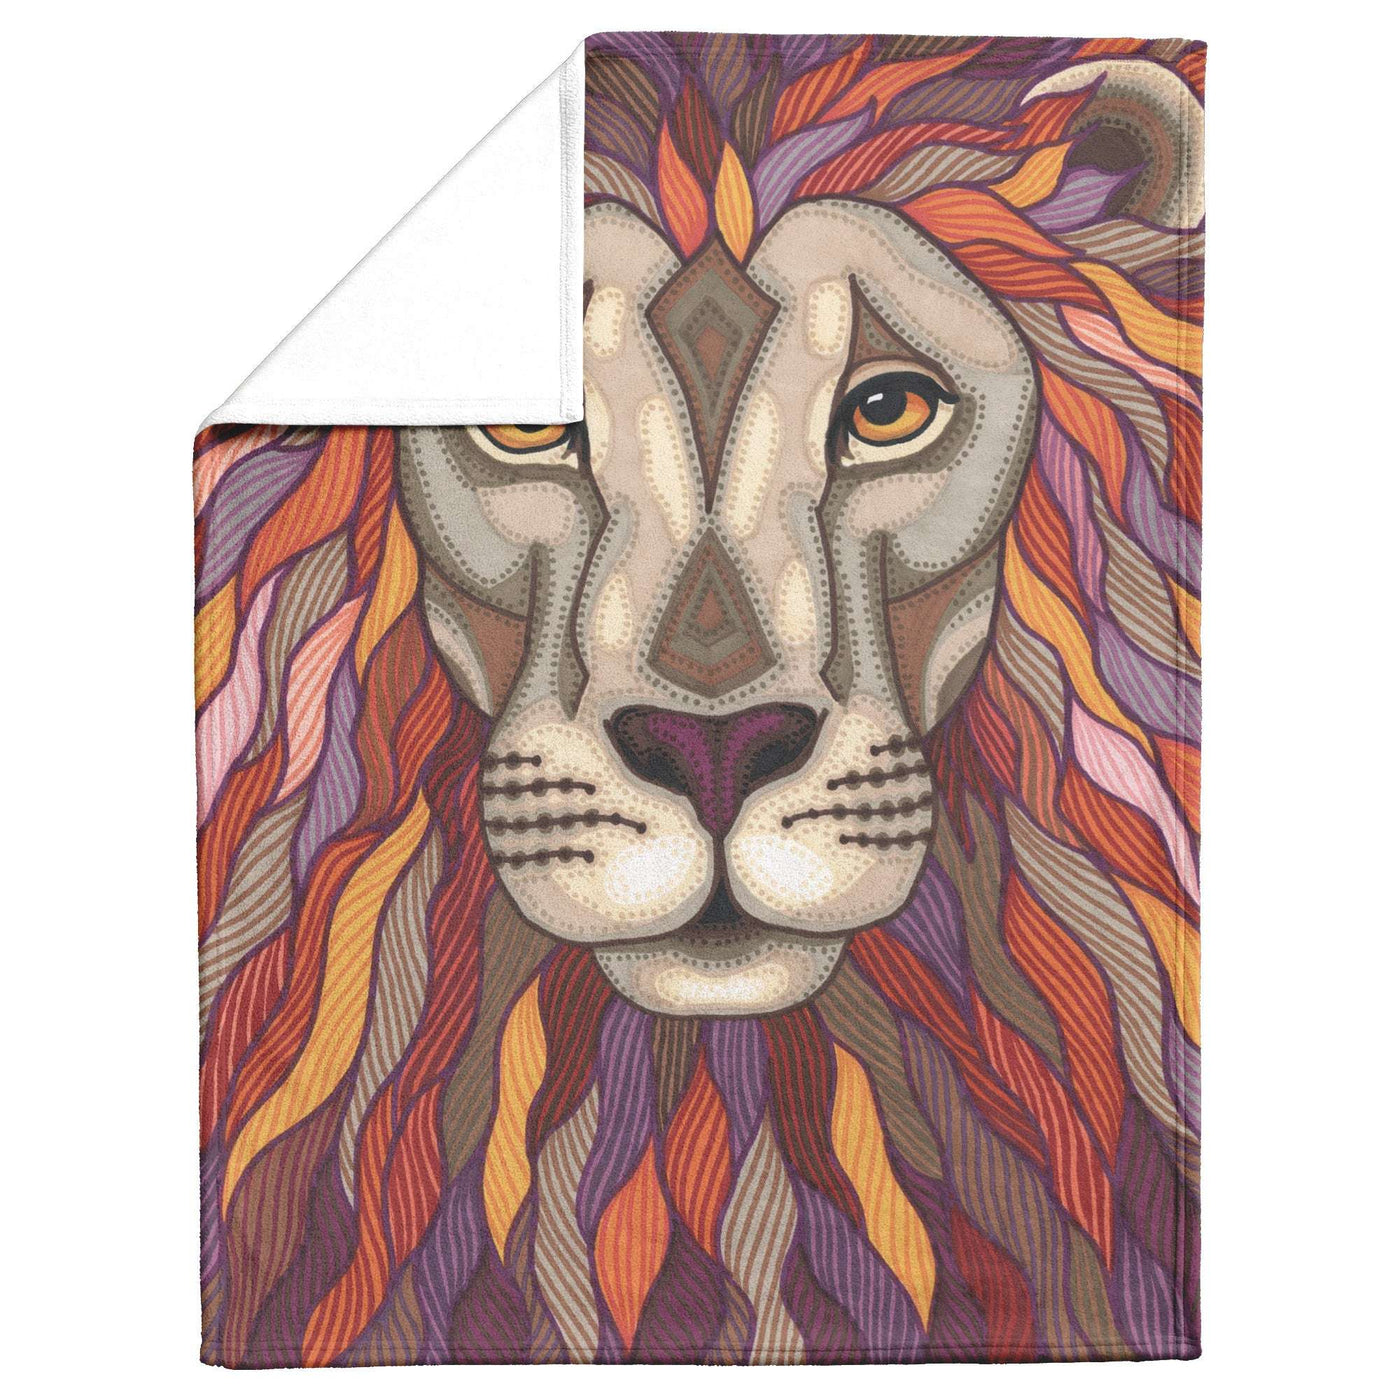 Illustration of a lion's face with intricate, colorful patterns on a Lion Pride Blanket, featuring shades of purple, orange, and yellow.